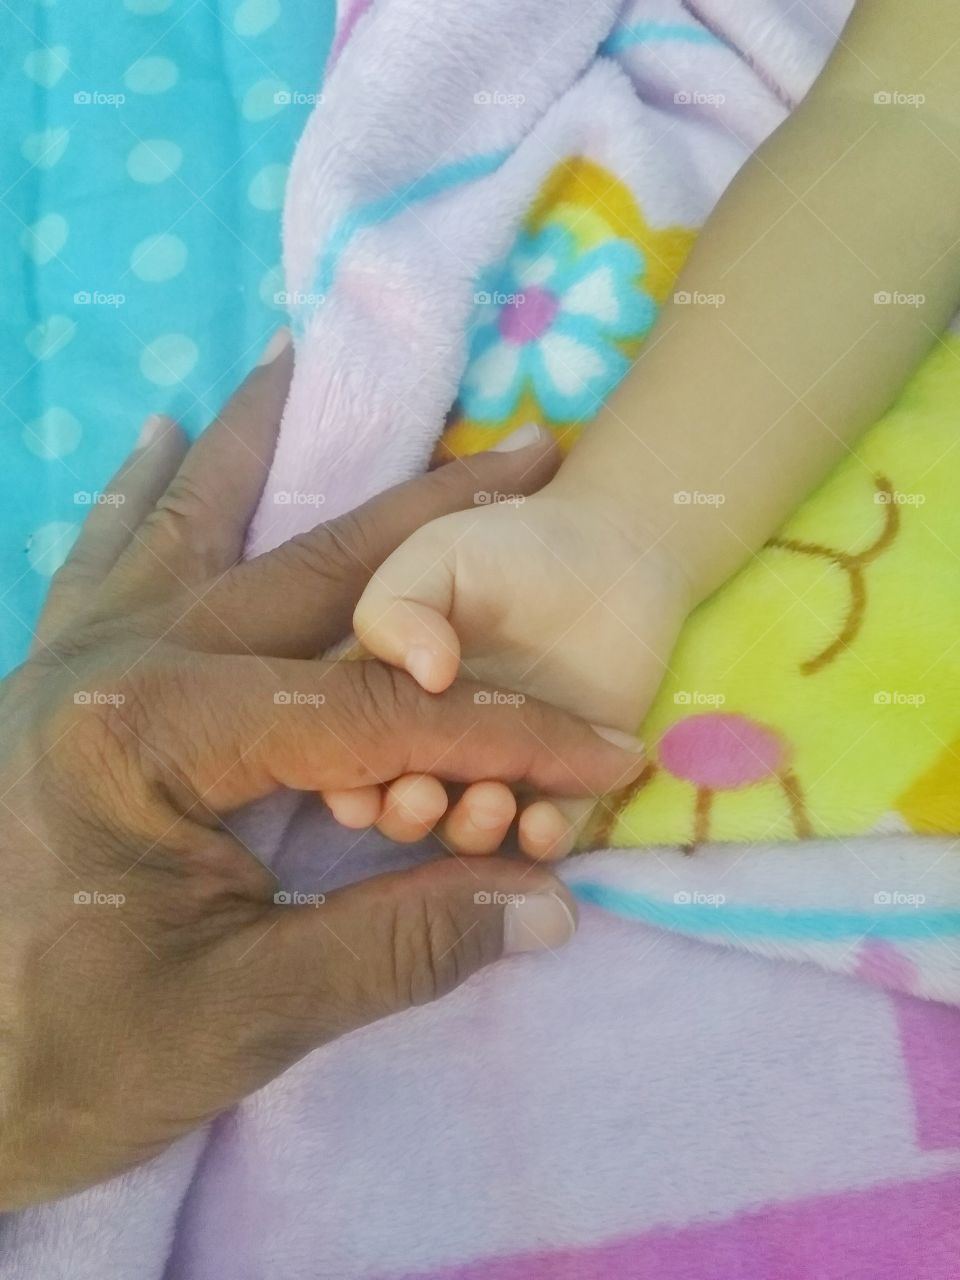 Baby's hand holding father's finger while sleeping deeply.